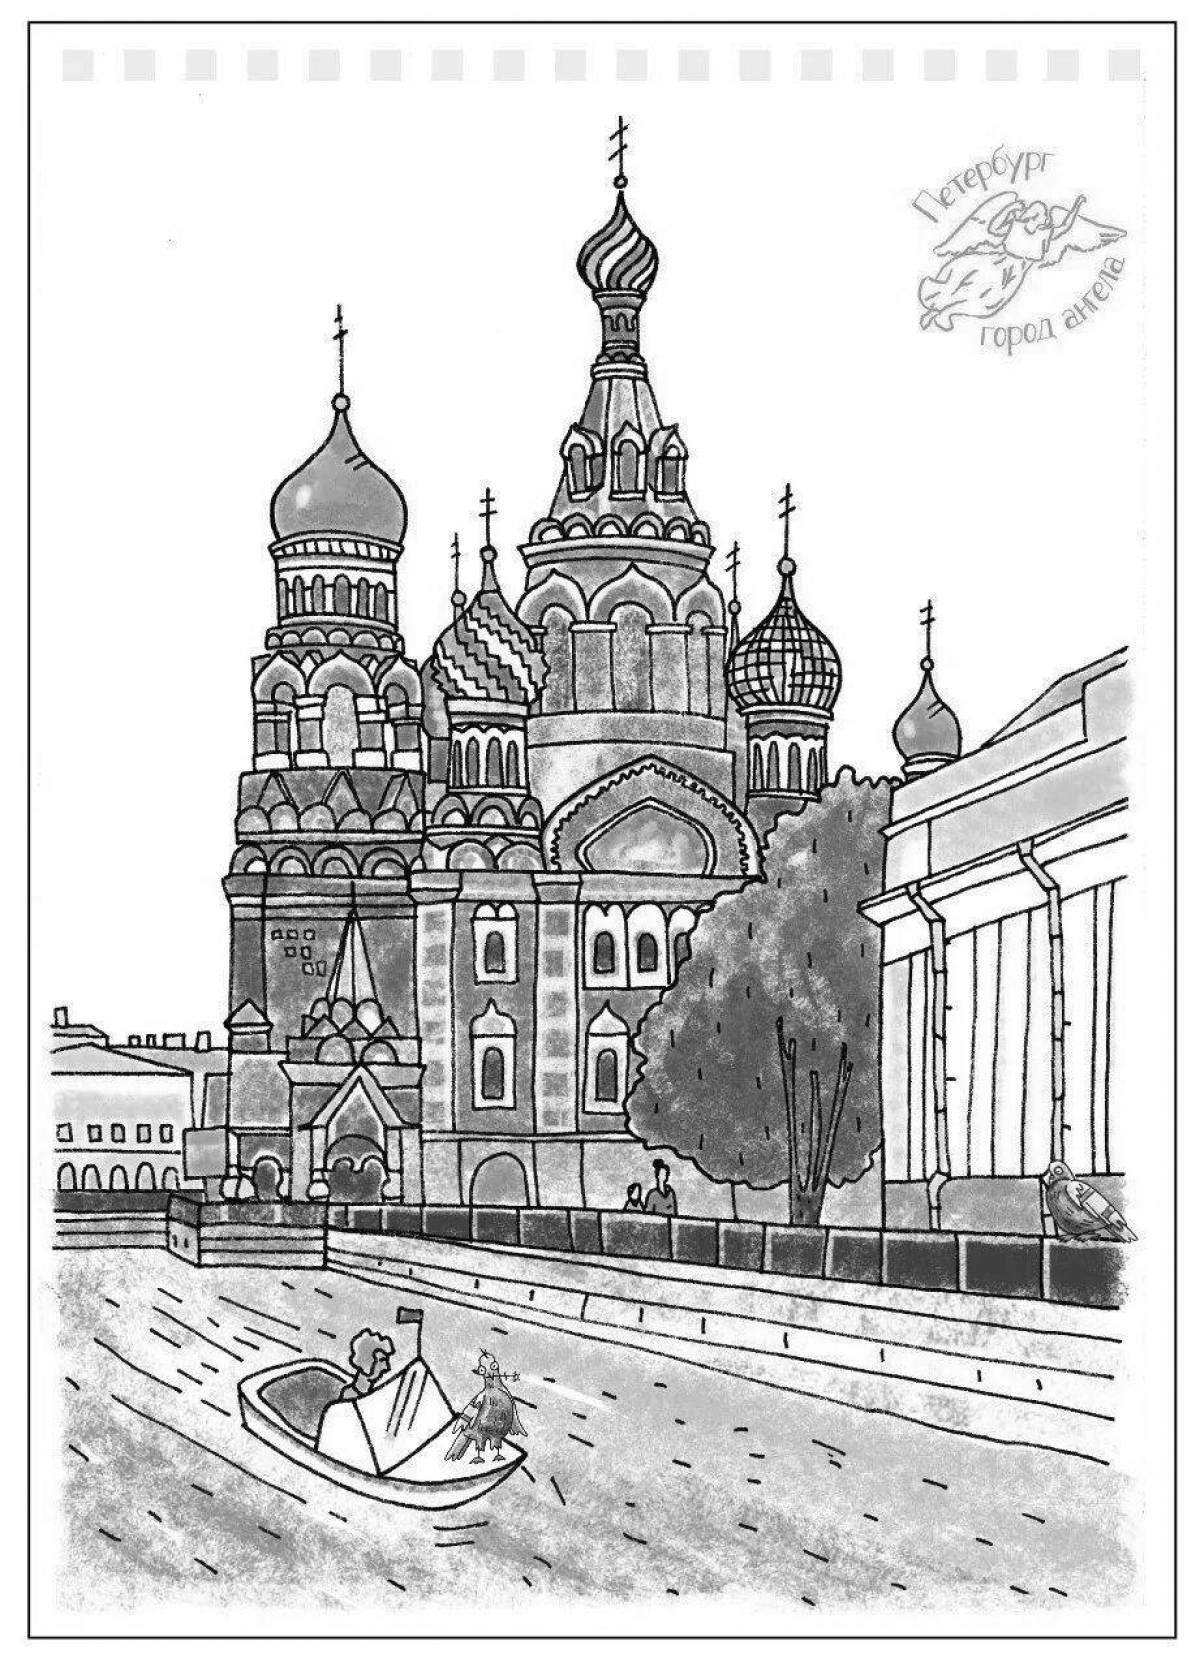 Brilliant savior on spilled blood coloring page